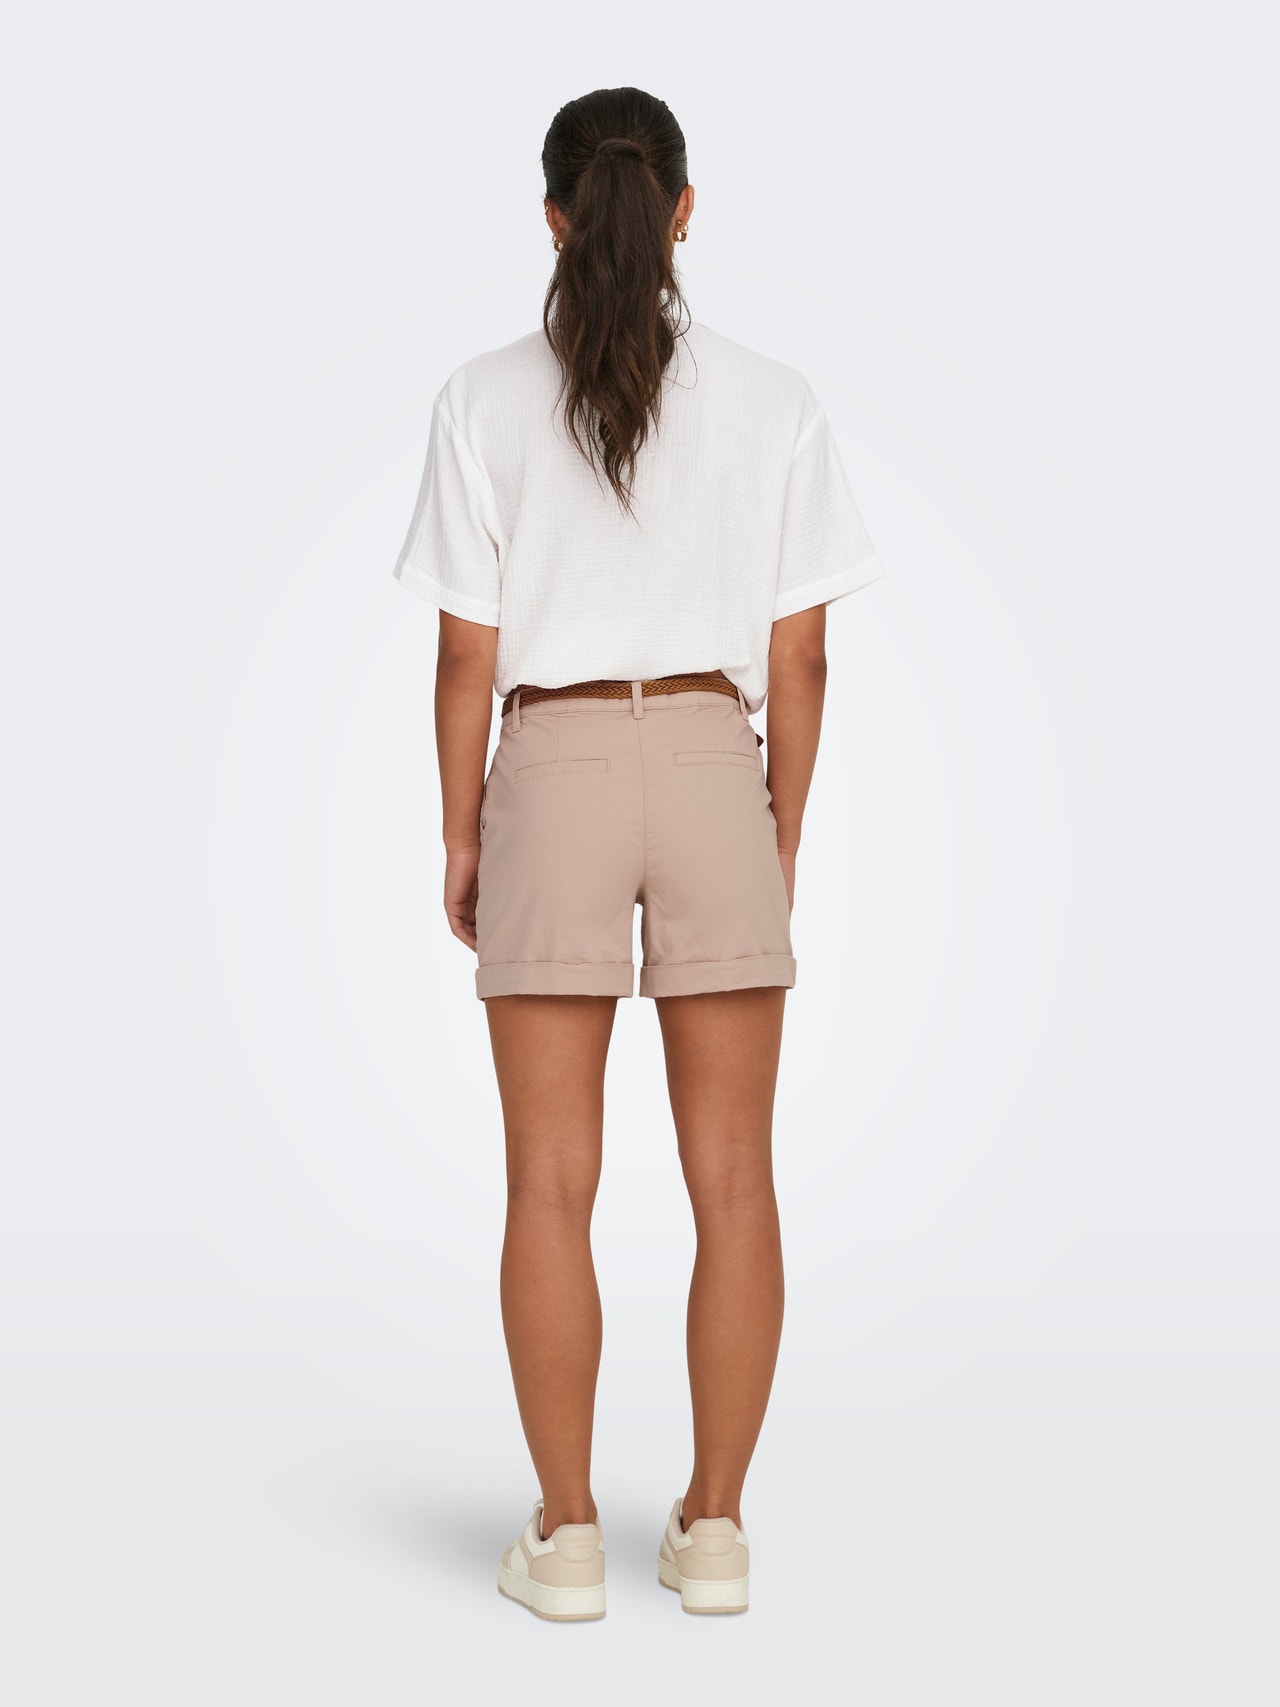 ONLY Shorts Regular Fit Taille moyenne Ourlets repliés -Rugby Tan - 15324743